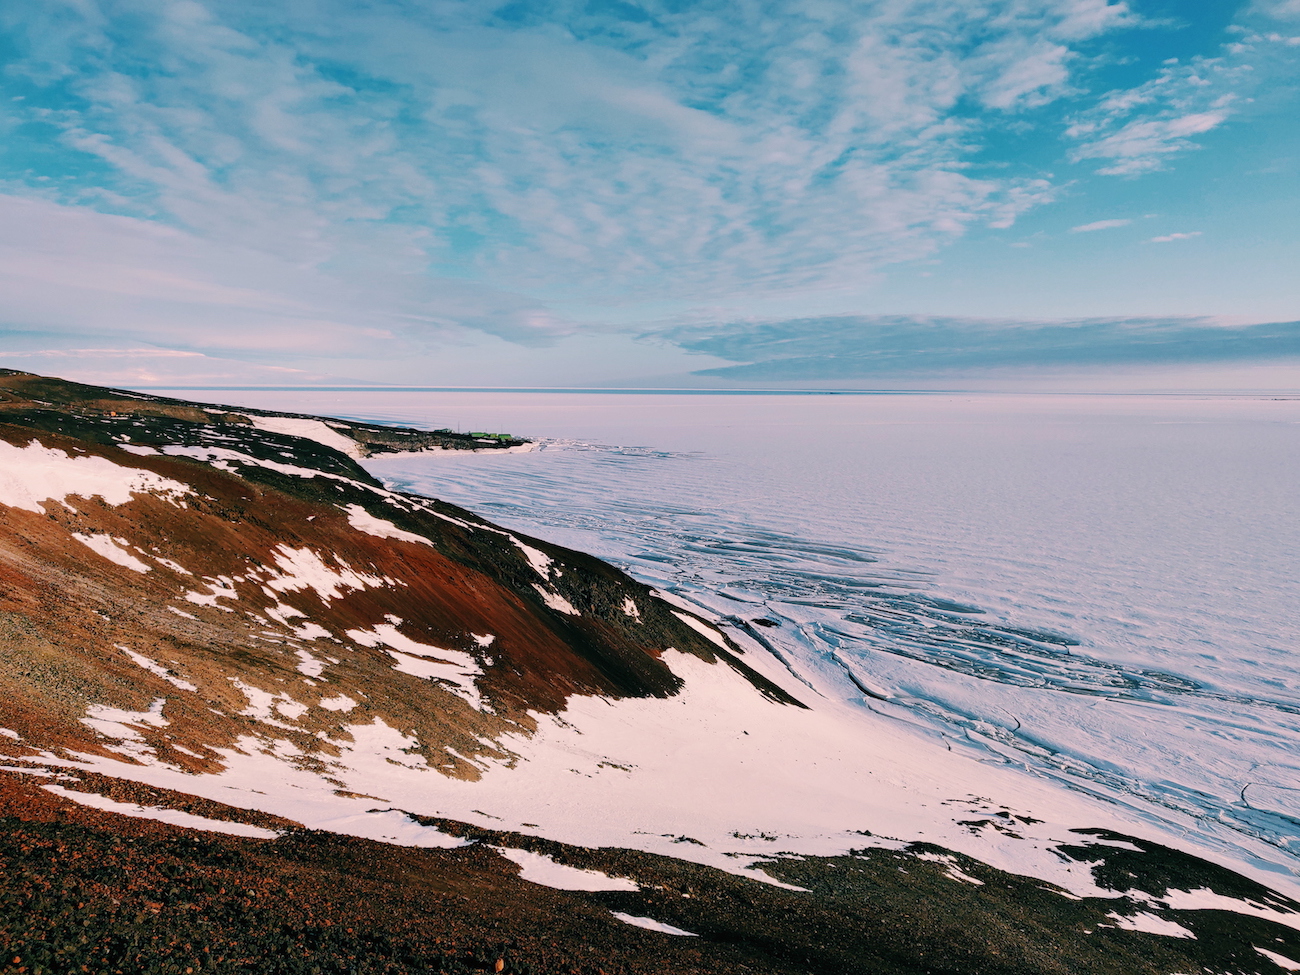 View of sea ice by McMurdo Station with Kiwi station Scott Base in the distance